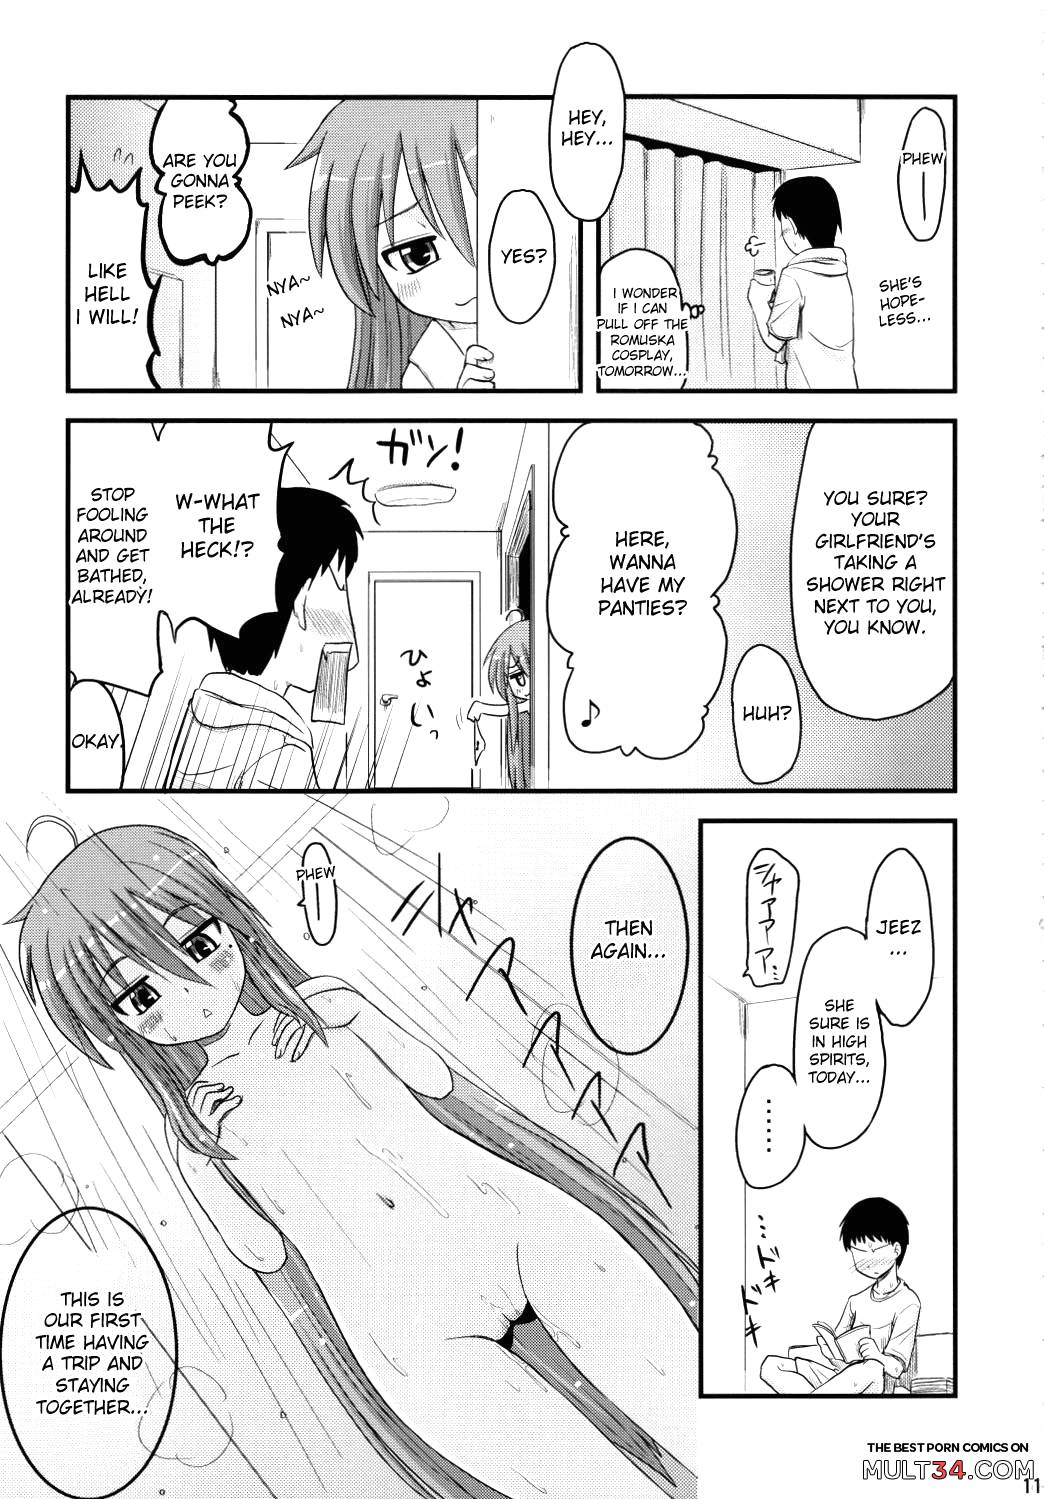 Konata and Oh-zu 4 people each and every one + 1 page 7